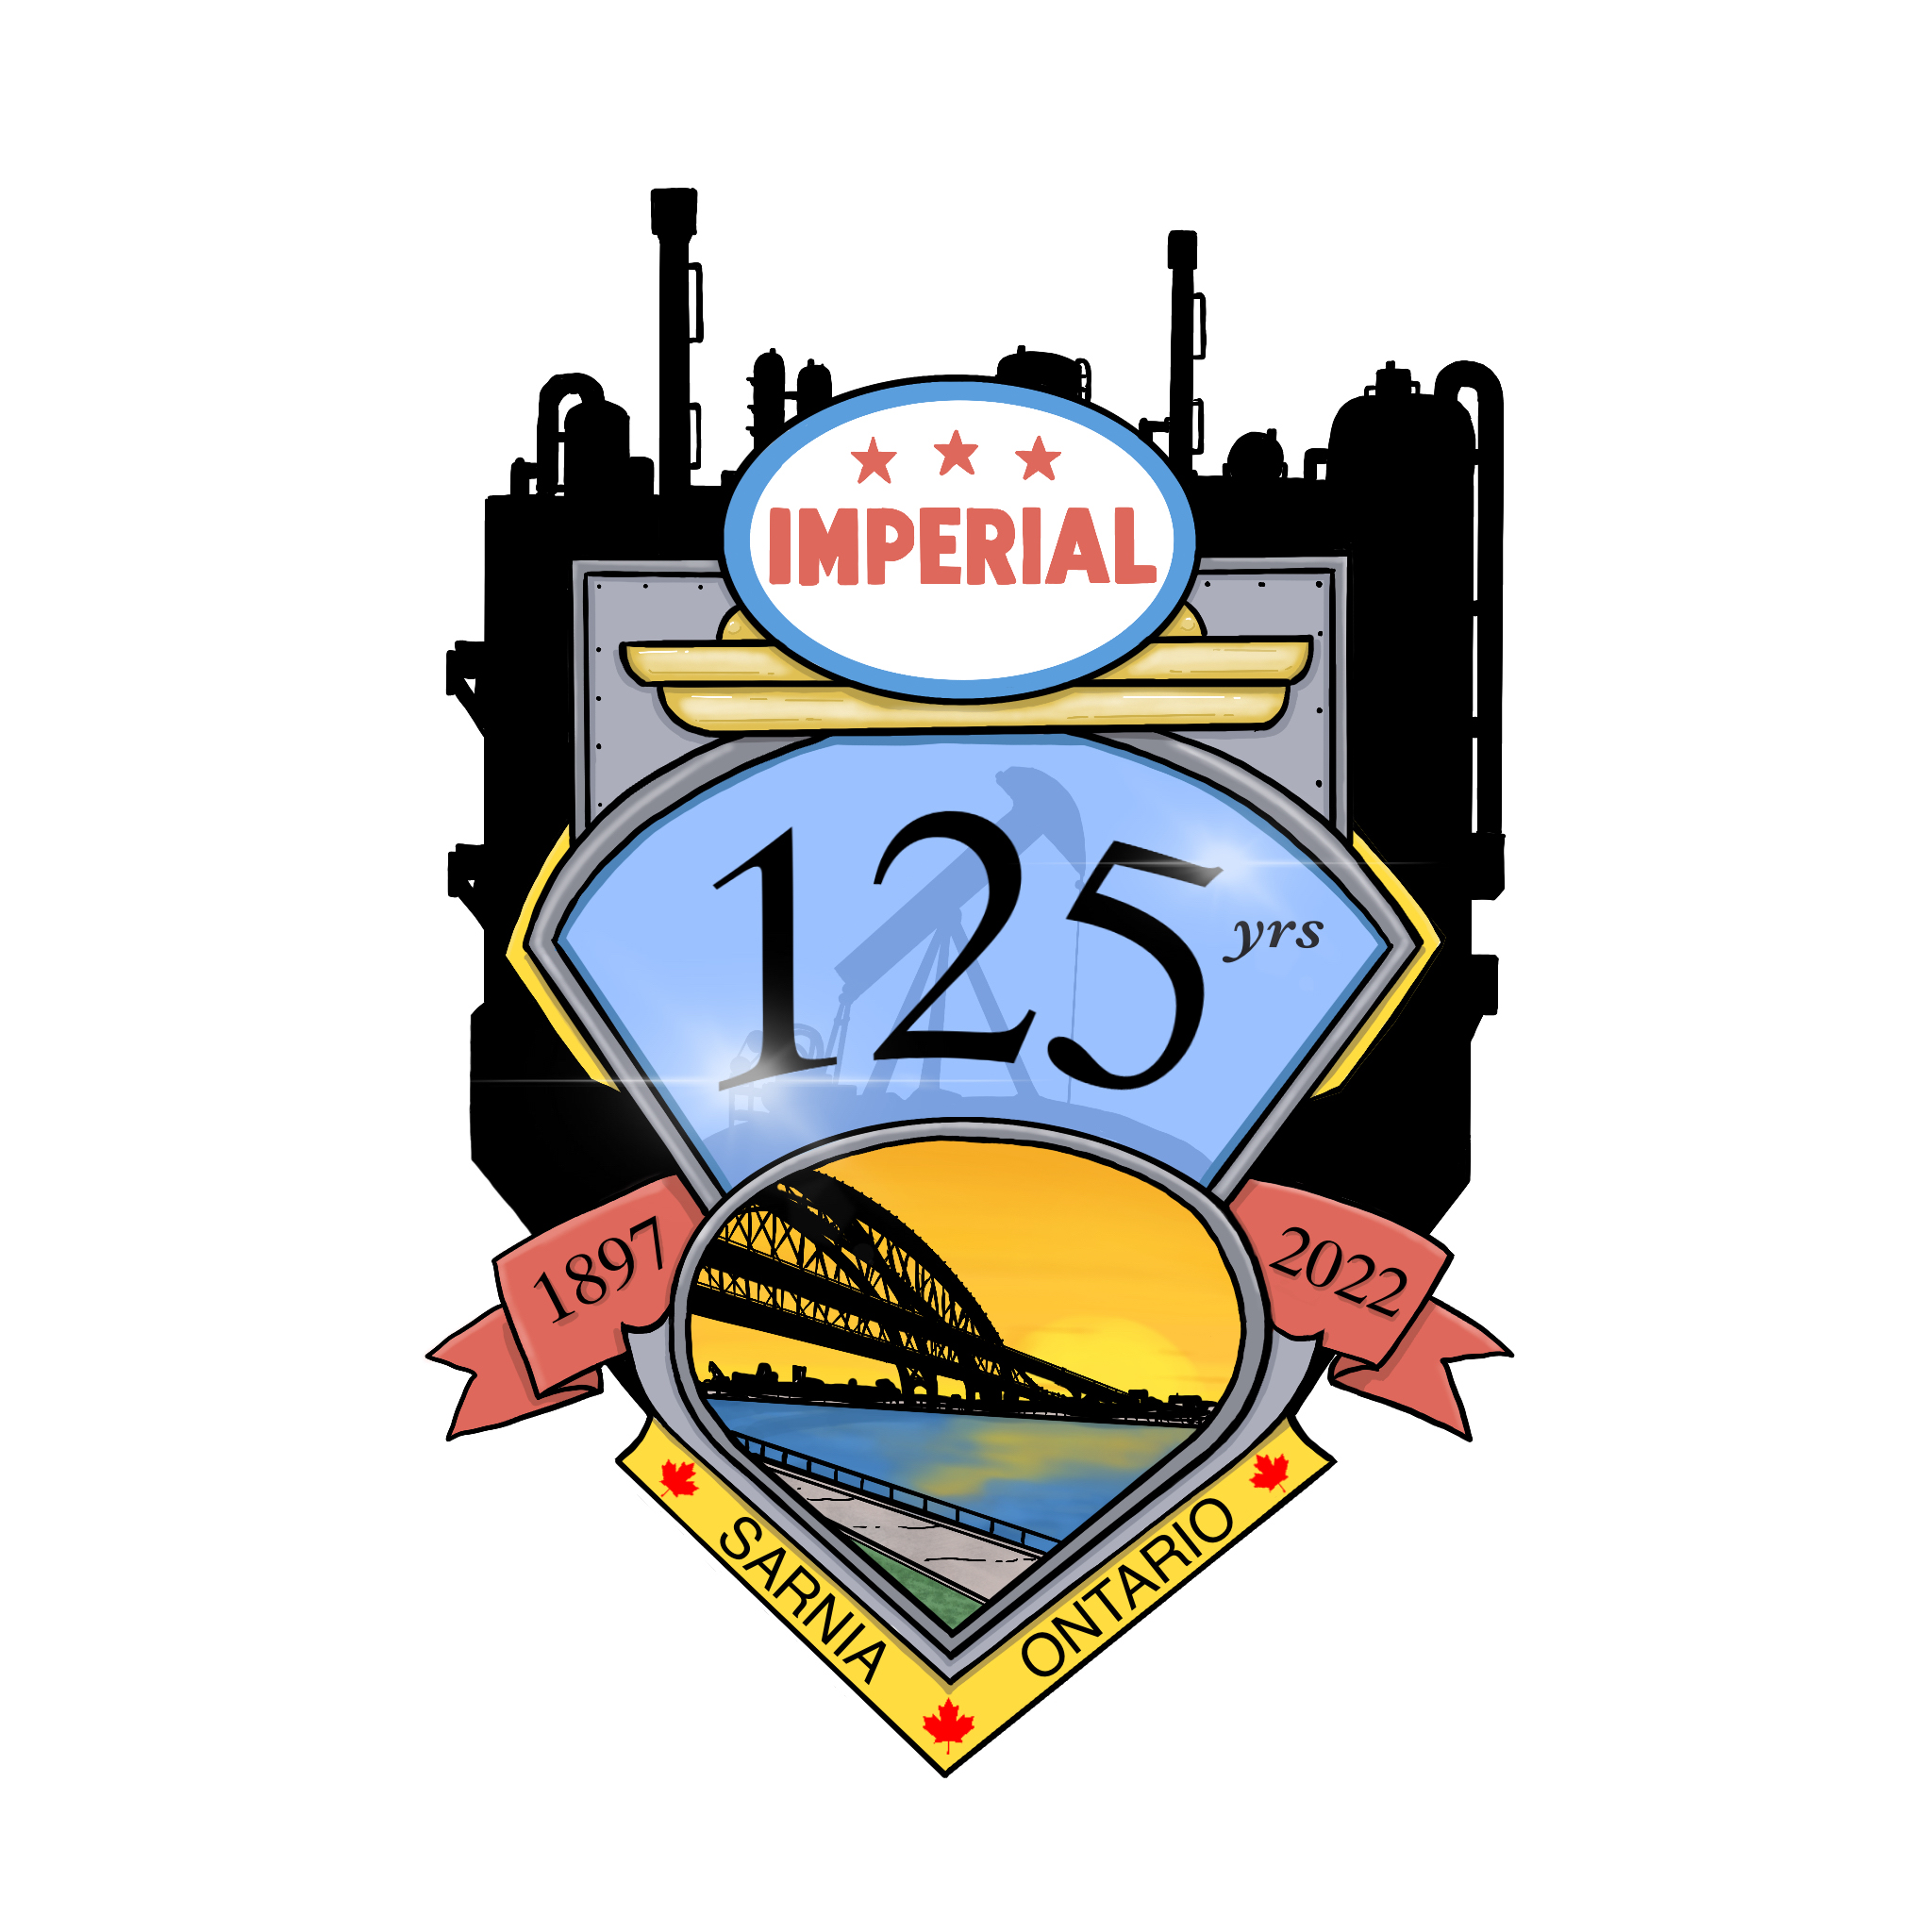 Imperial Oil Celebrates 125th Anniversary Bases Website